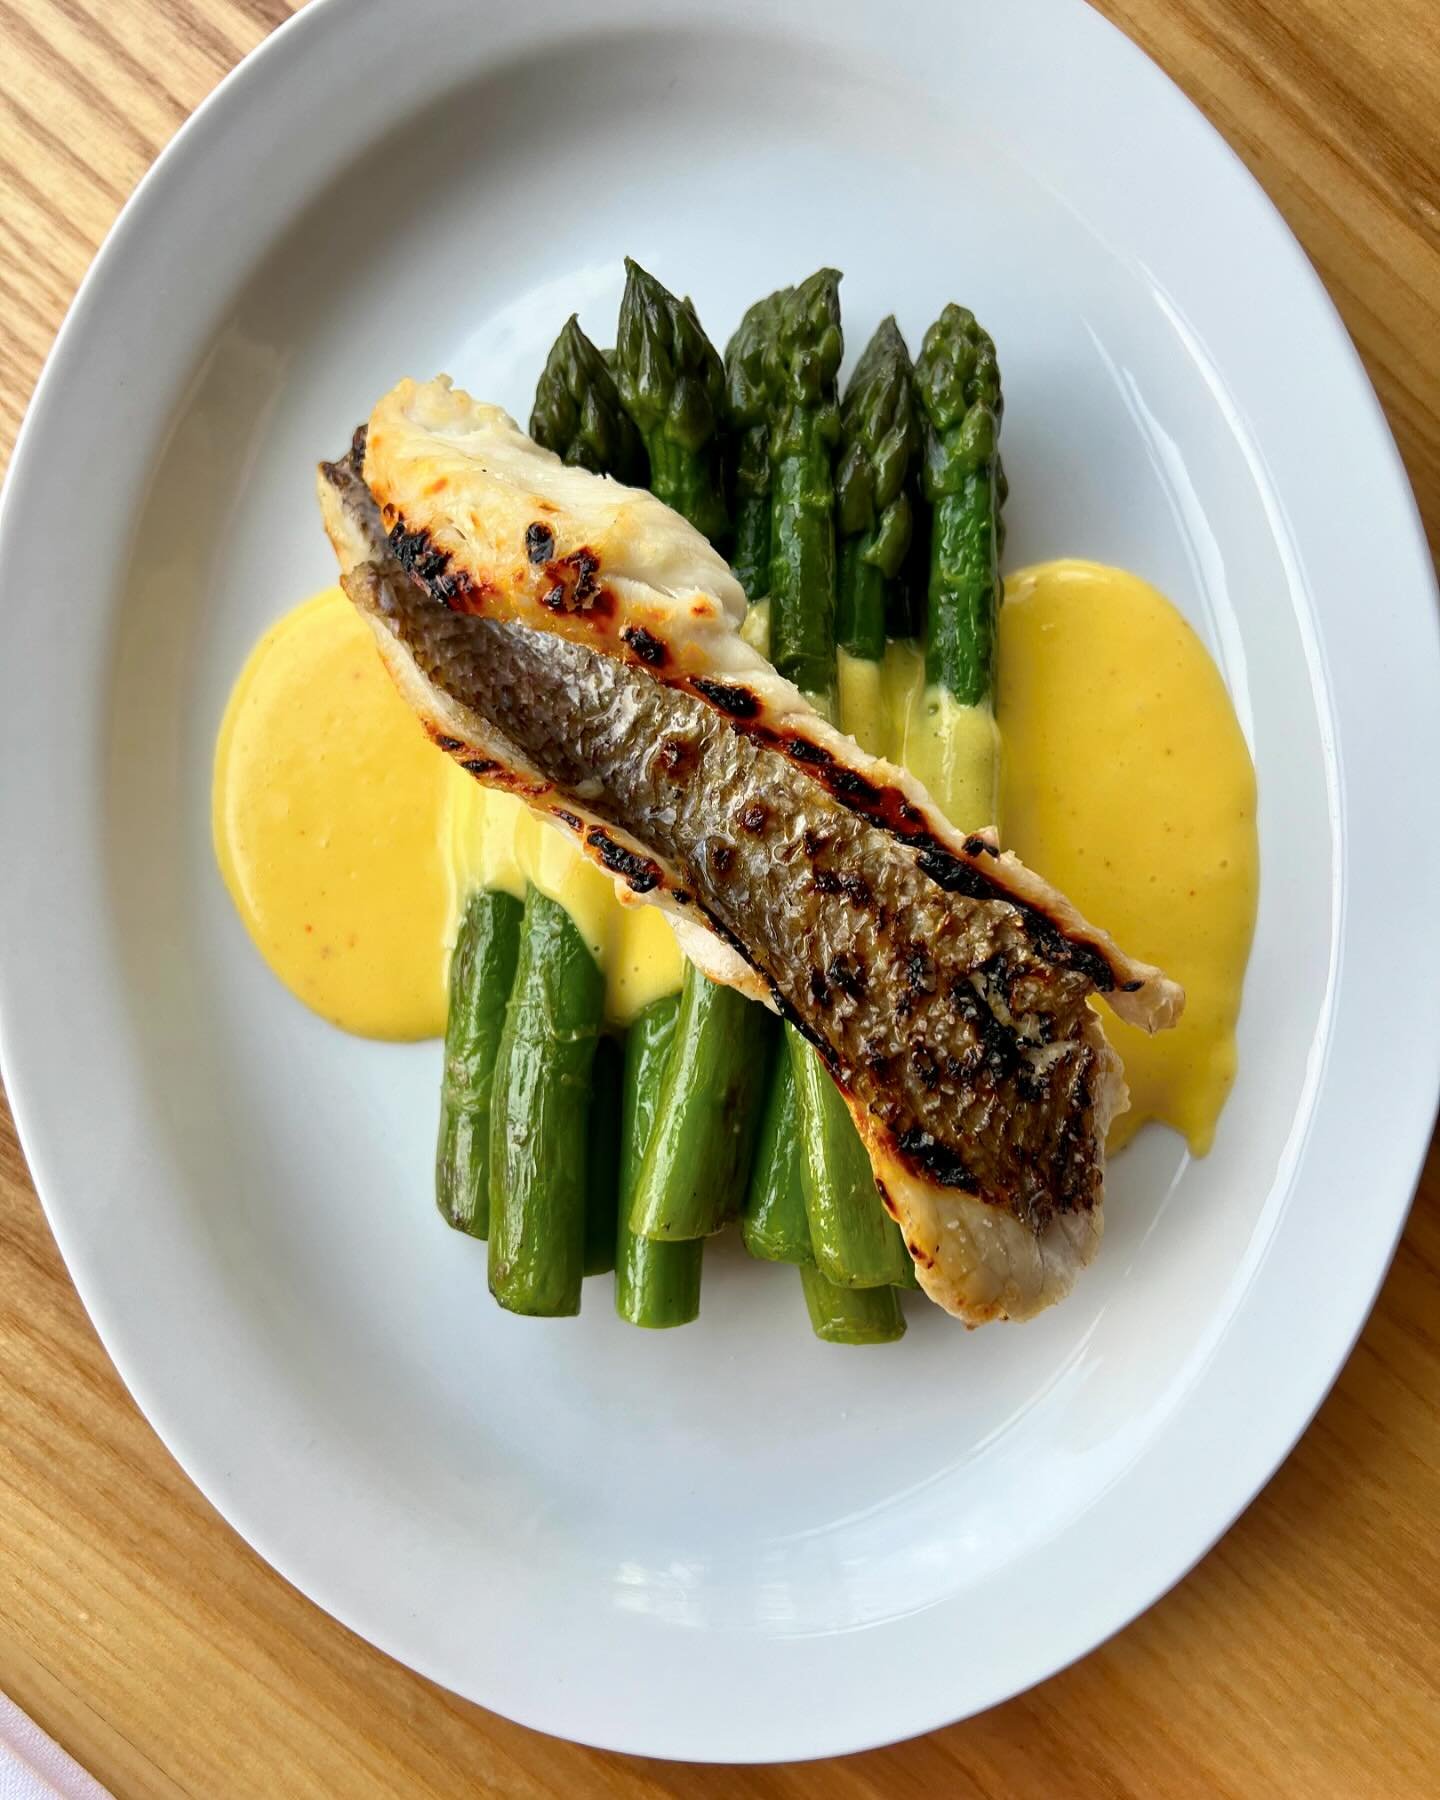 Ontario Asparagus and Hollandaise with an add on of Charcoal Grilled Wild Red Seabream